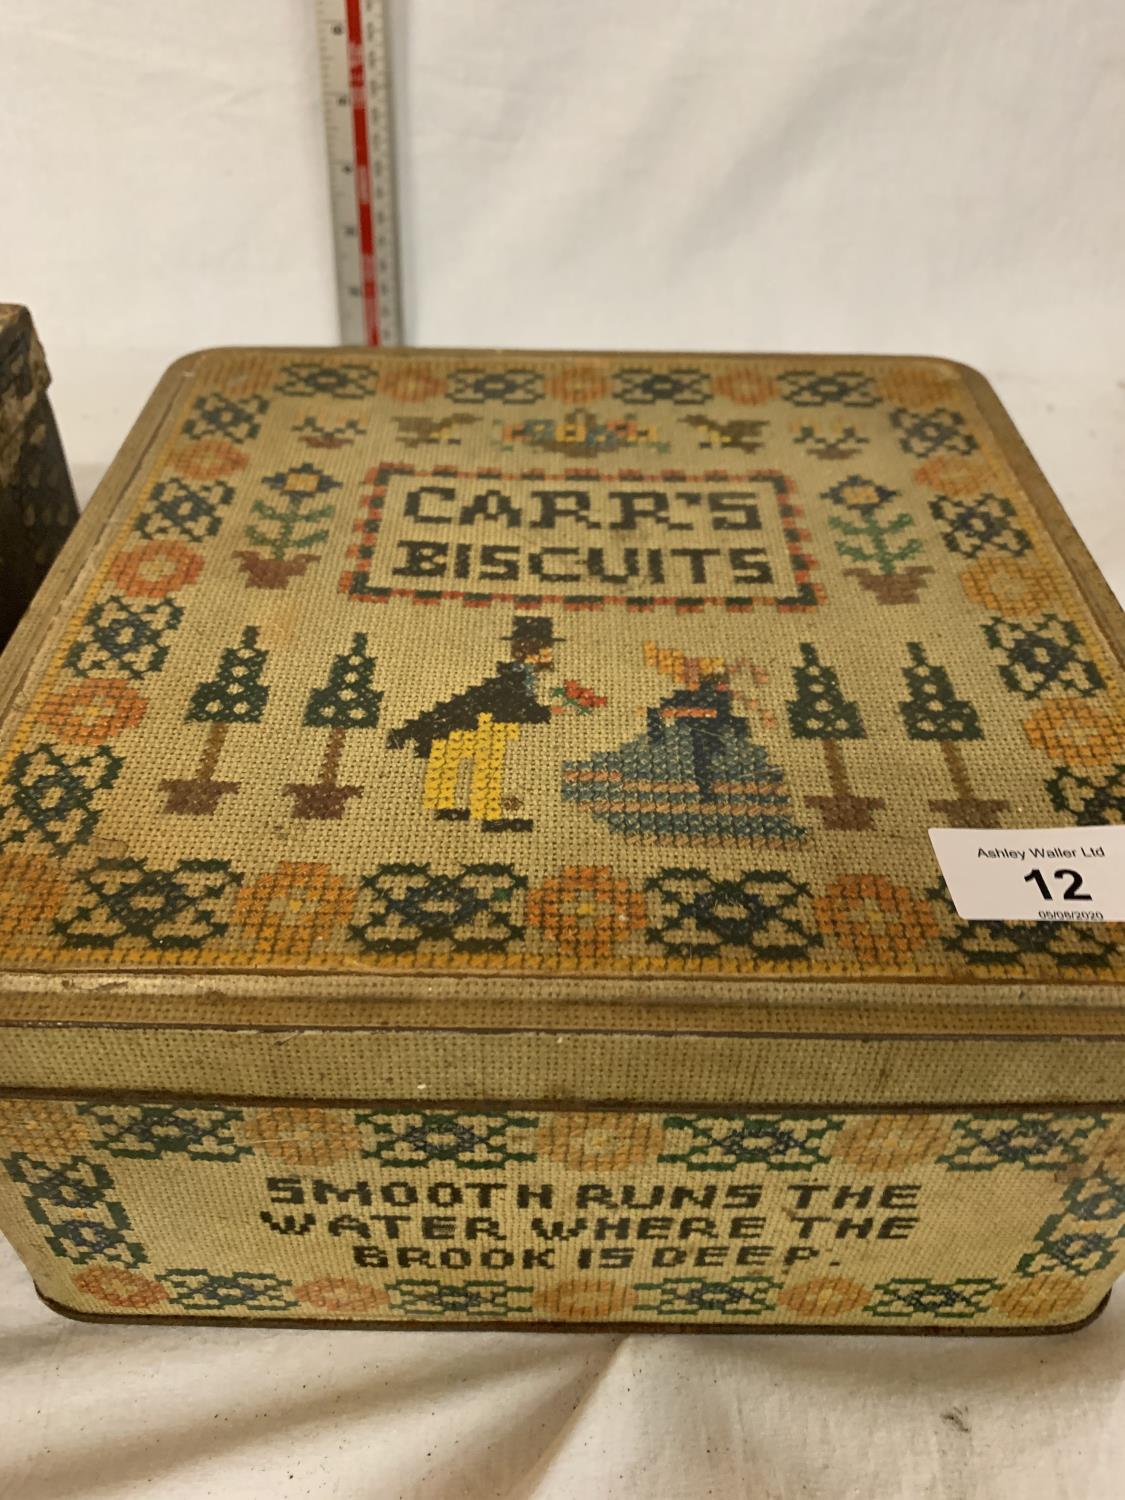 TWO ORIGINAL VINTAGE TINS TO INCLUDE JACOBS CREAM CRACKERS AND CARR'S BISCUITS - Image 6 of 12